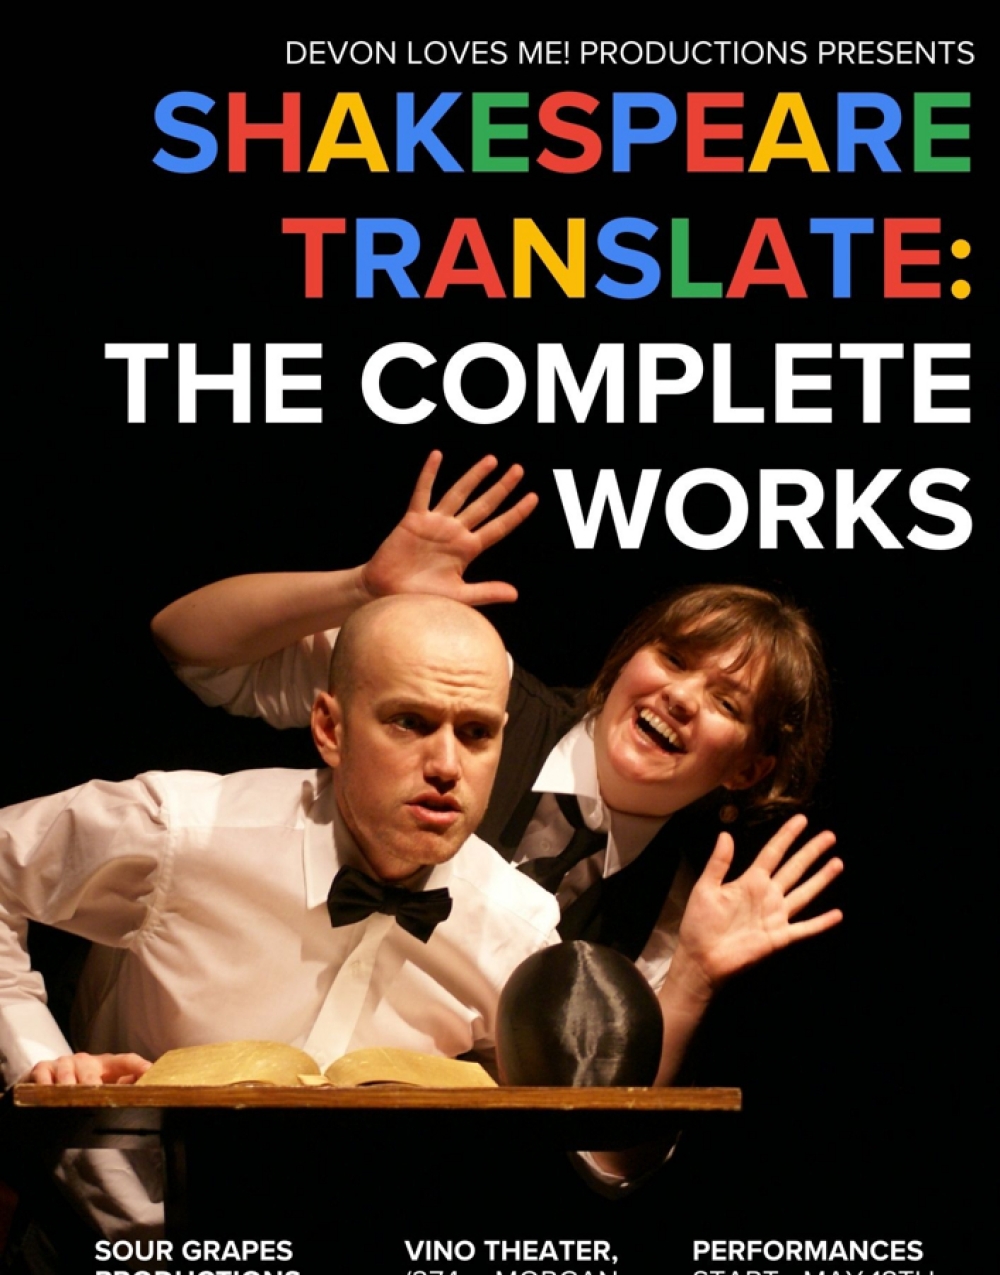 Shakespeare Translate: The Complete Works at Vino Theater